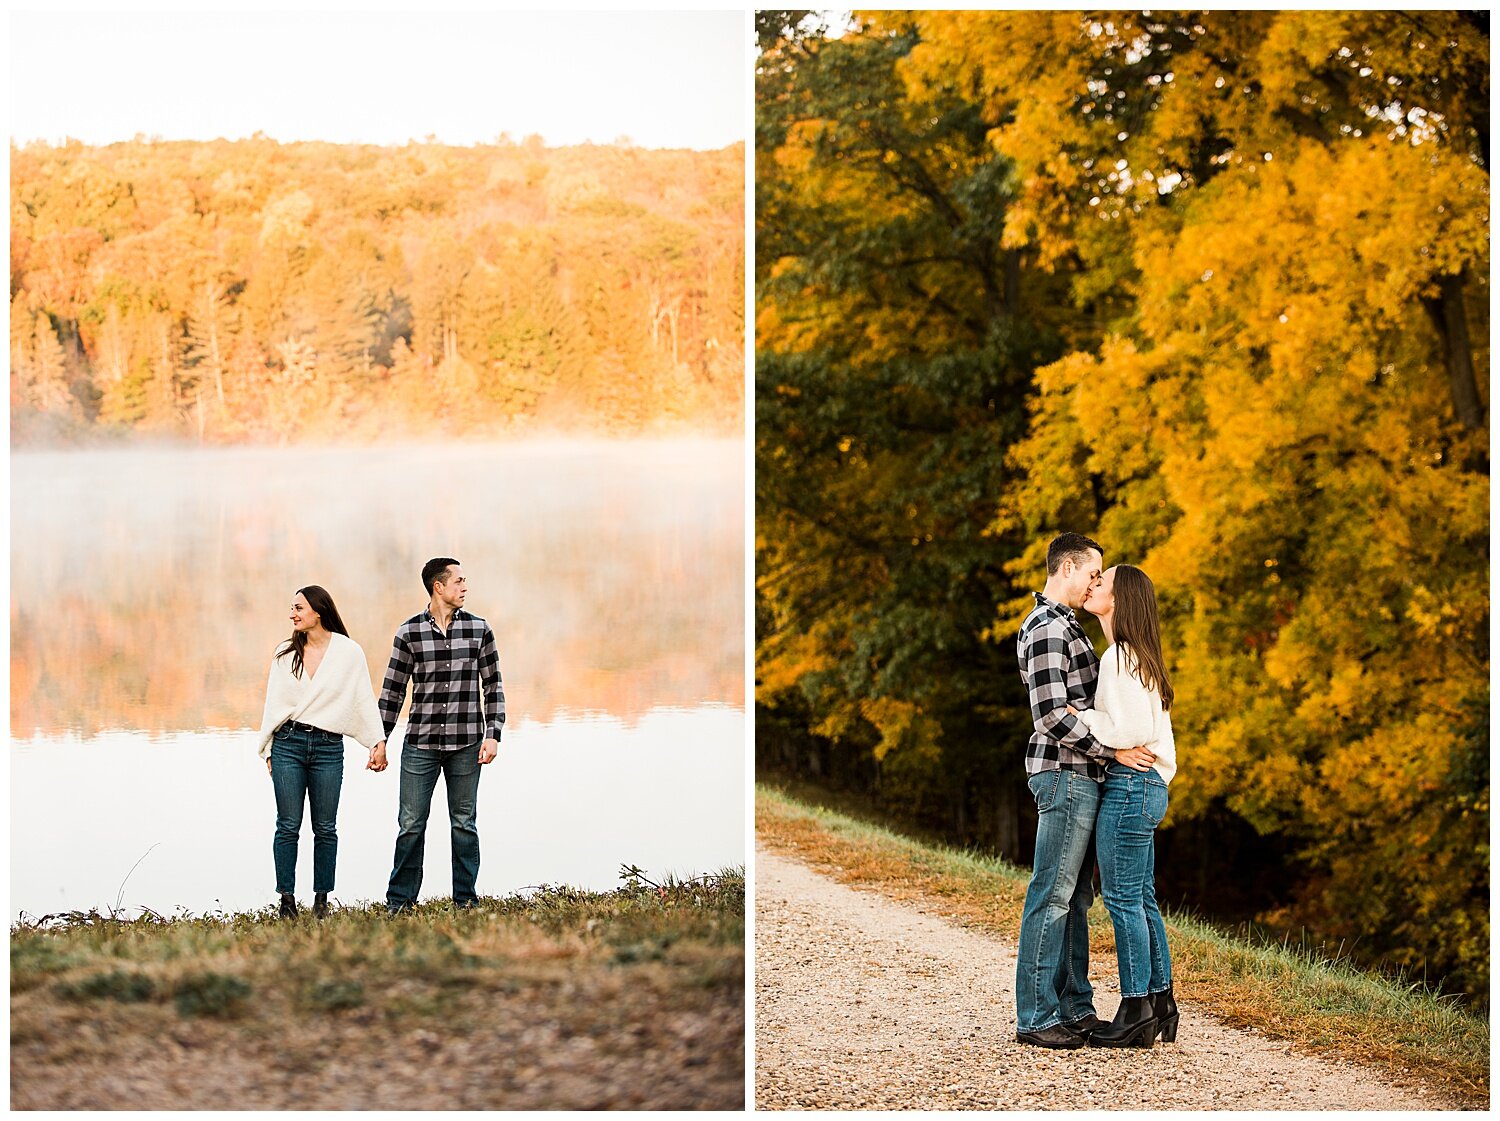 Autumn-Engagement-Apollo-Fields-Fall-New-England-Leaves-Photography-16.jpg